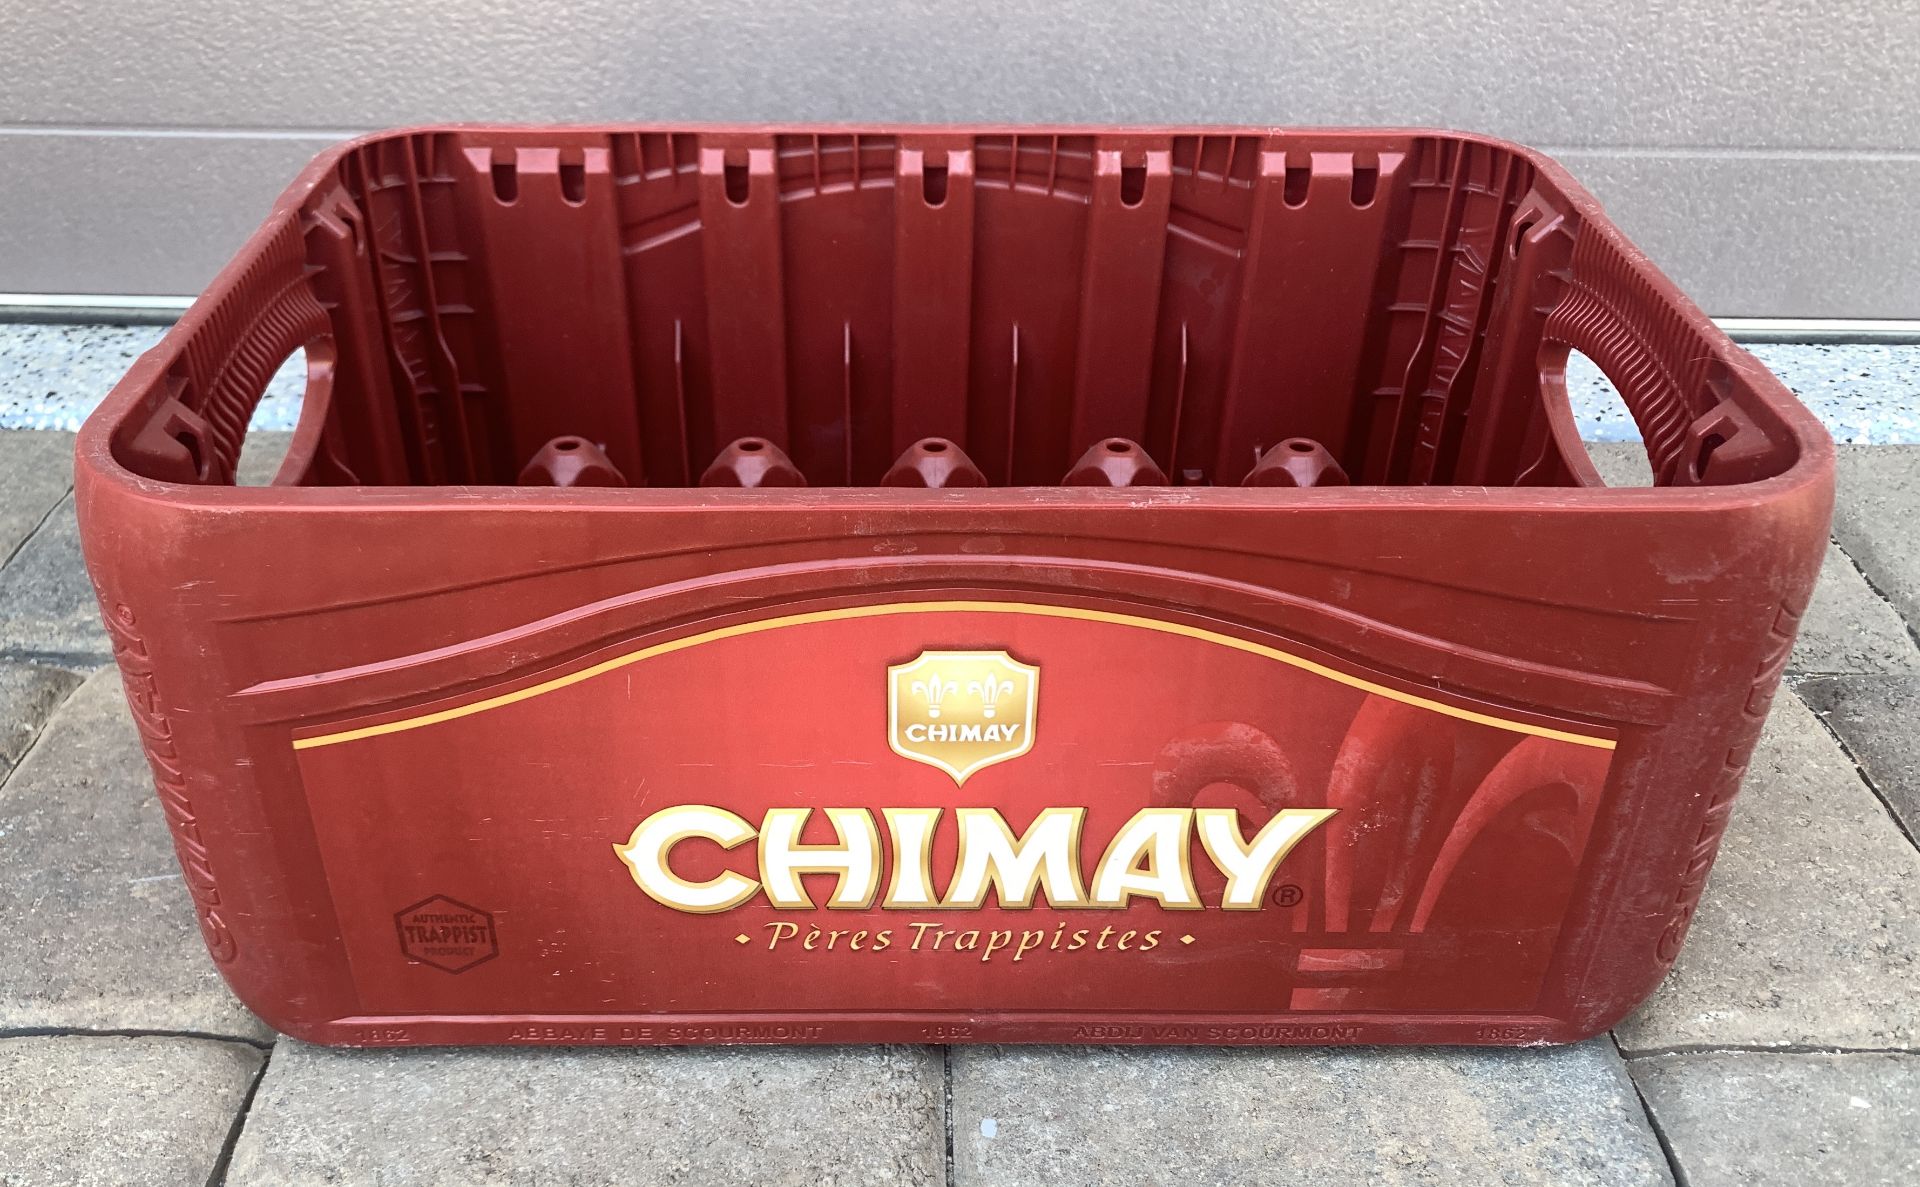 CHIMAY PERES TRAPPISTES DRINK BEER CRATE PLASTIC